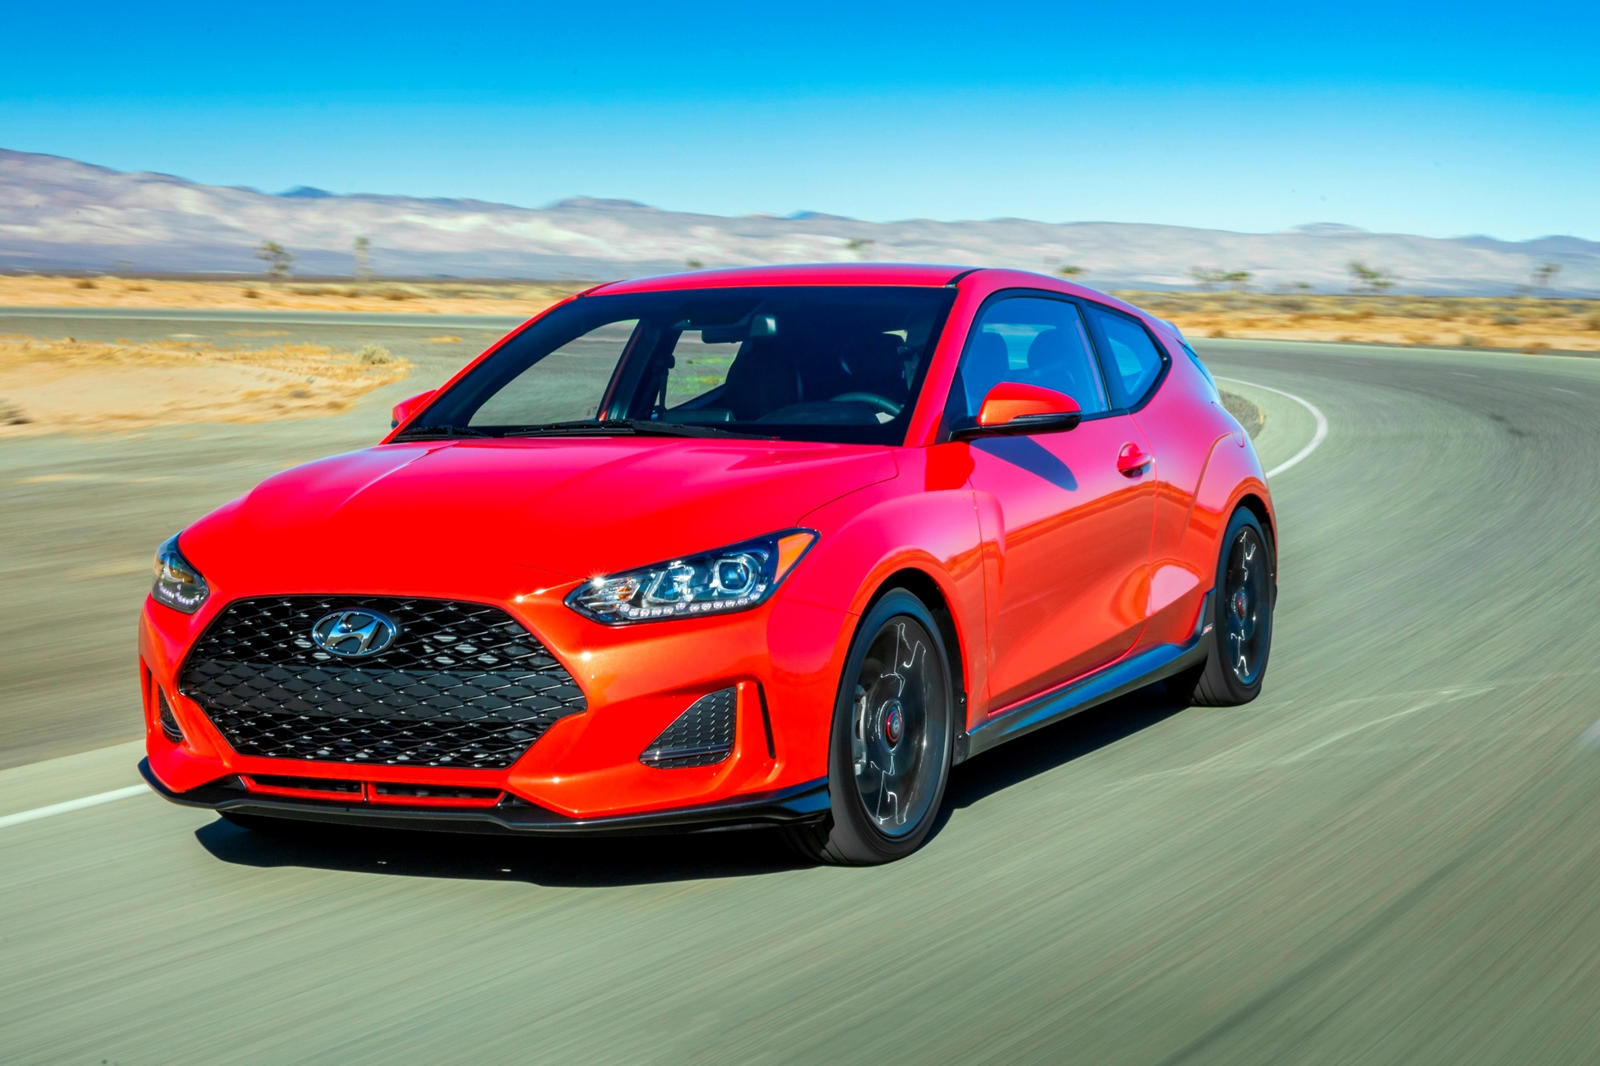 2021 Hyundai Veloster Review, Pricing | Veloster Hatchback Models | CarBuzz